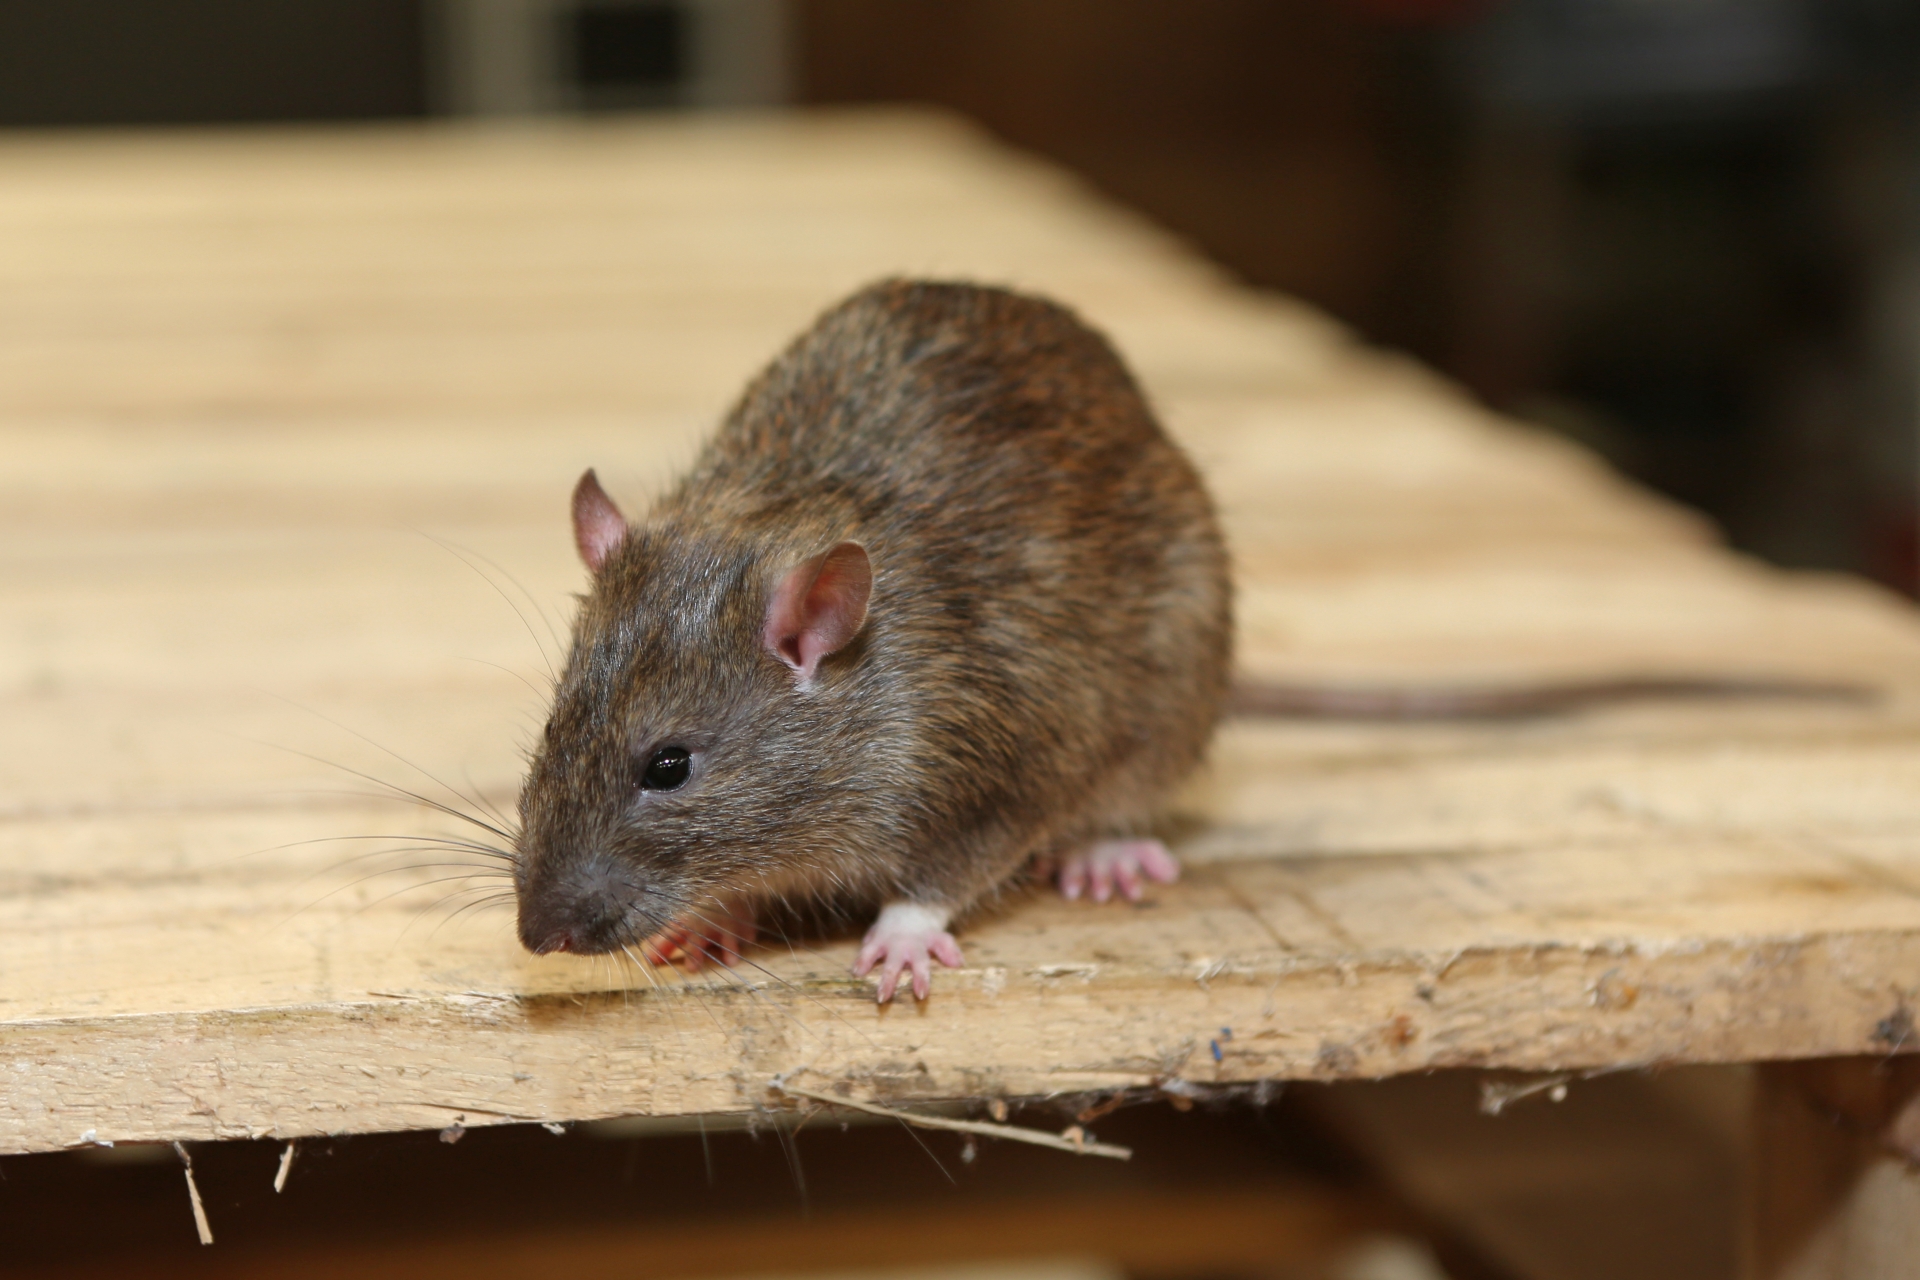 Rat Infestation, Pest Control in South Woodford, E18. Call Now 020 8166 9746